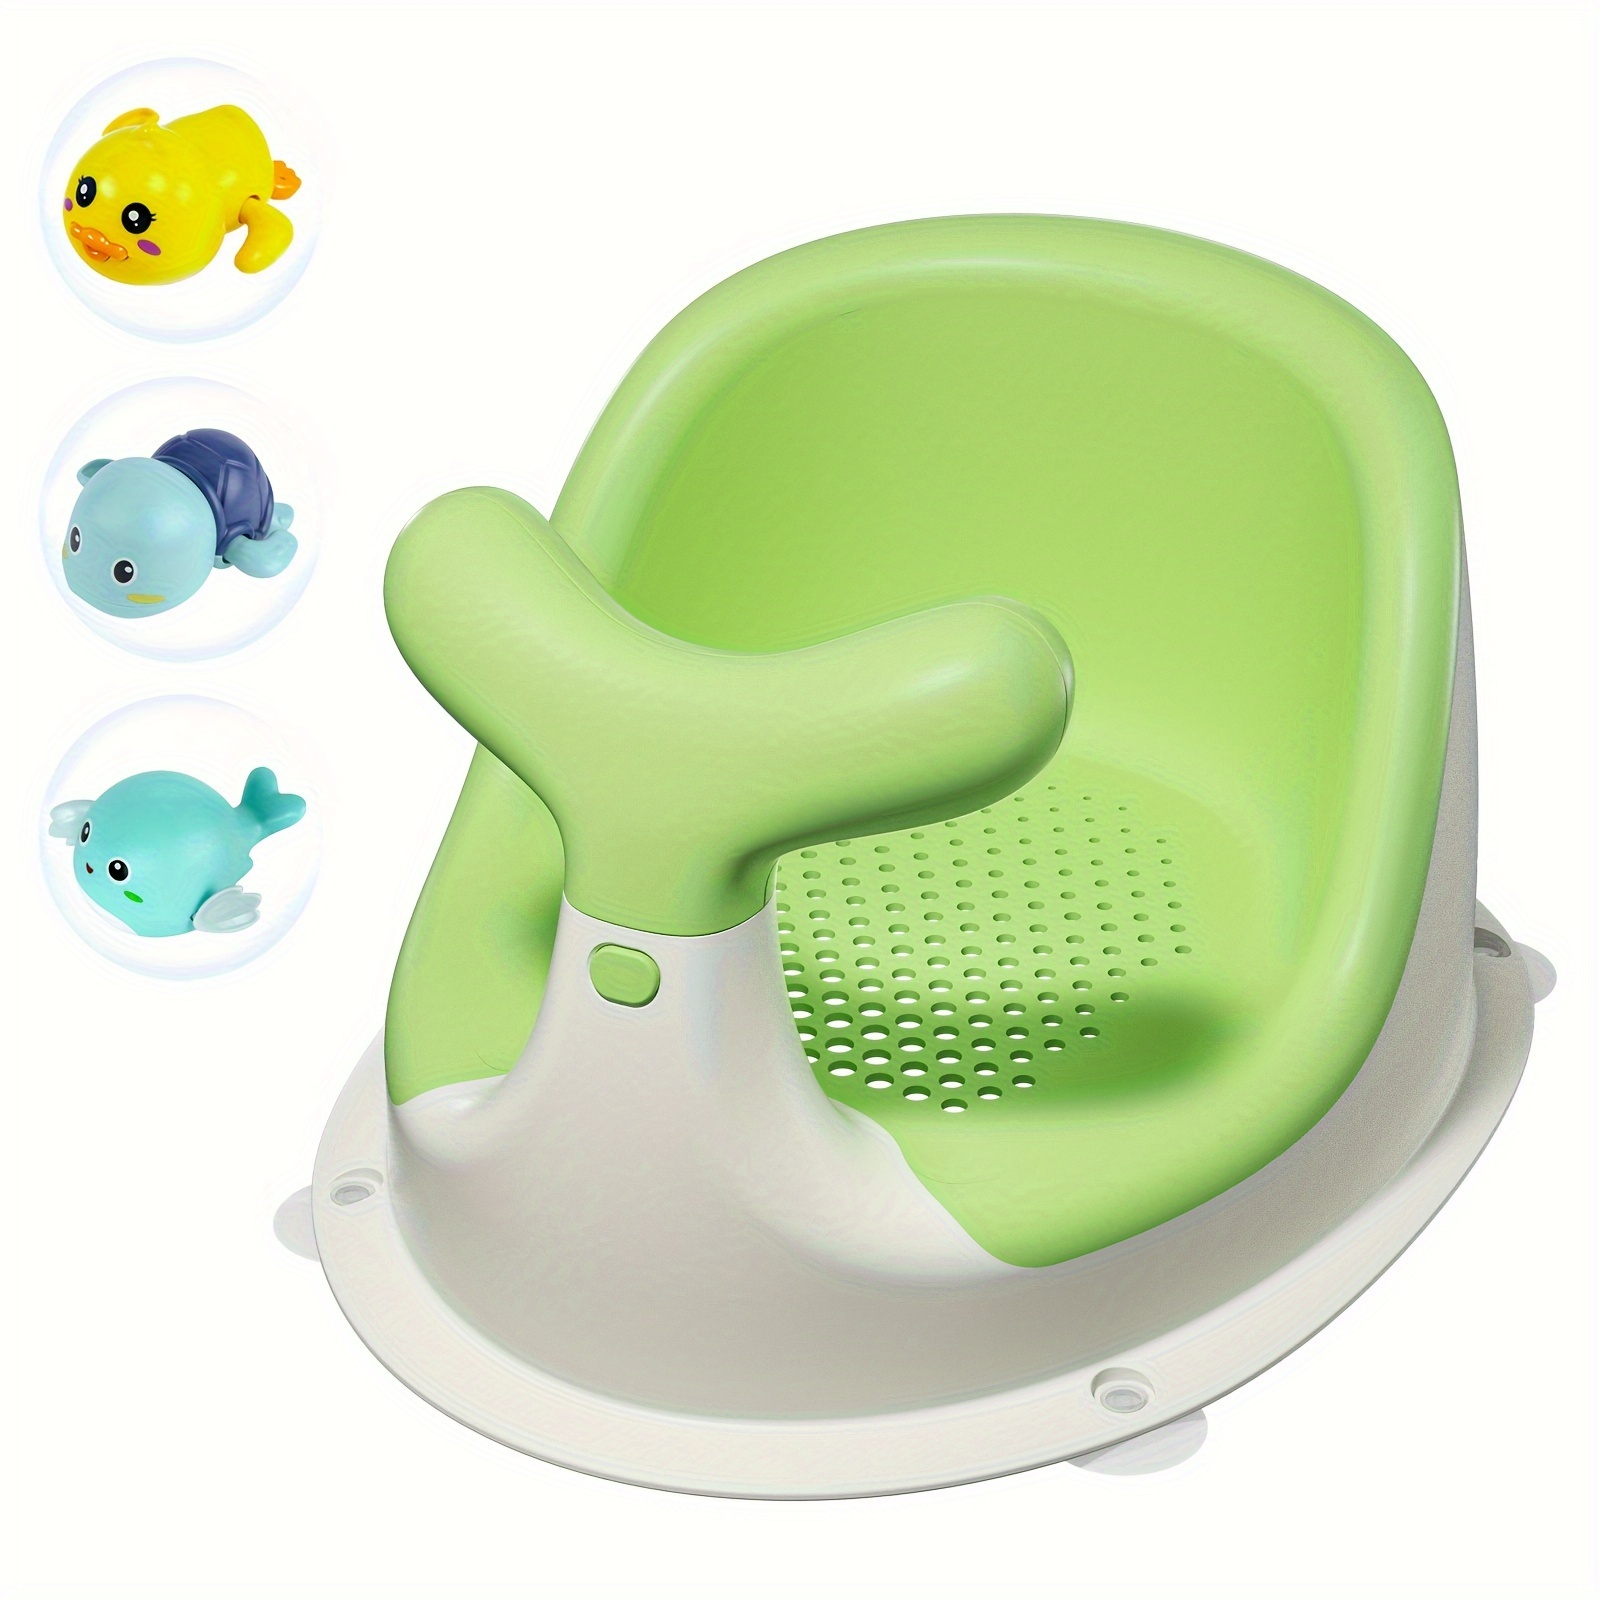 

Bathtub Seat, Infant Bath Seat With 4 Secure Suction Cups For Babies Sit Up Bathing In Tub Toddler Bath Seat